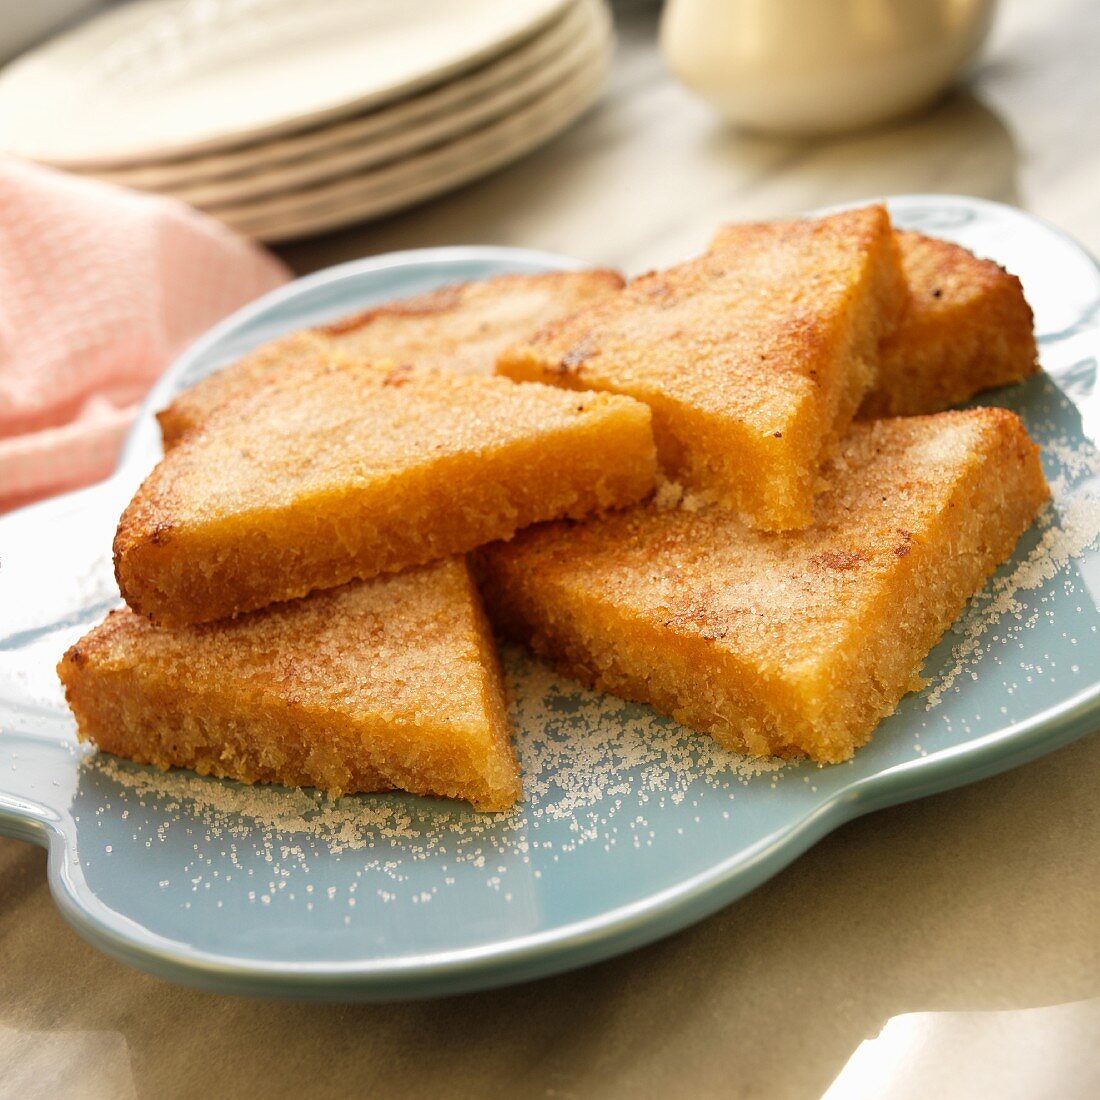 Fried Cassava Cakes Sprinkled with Sugar